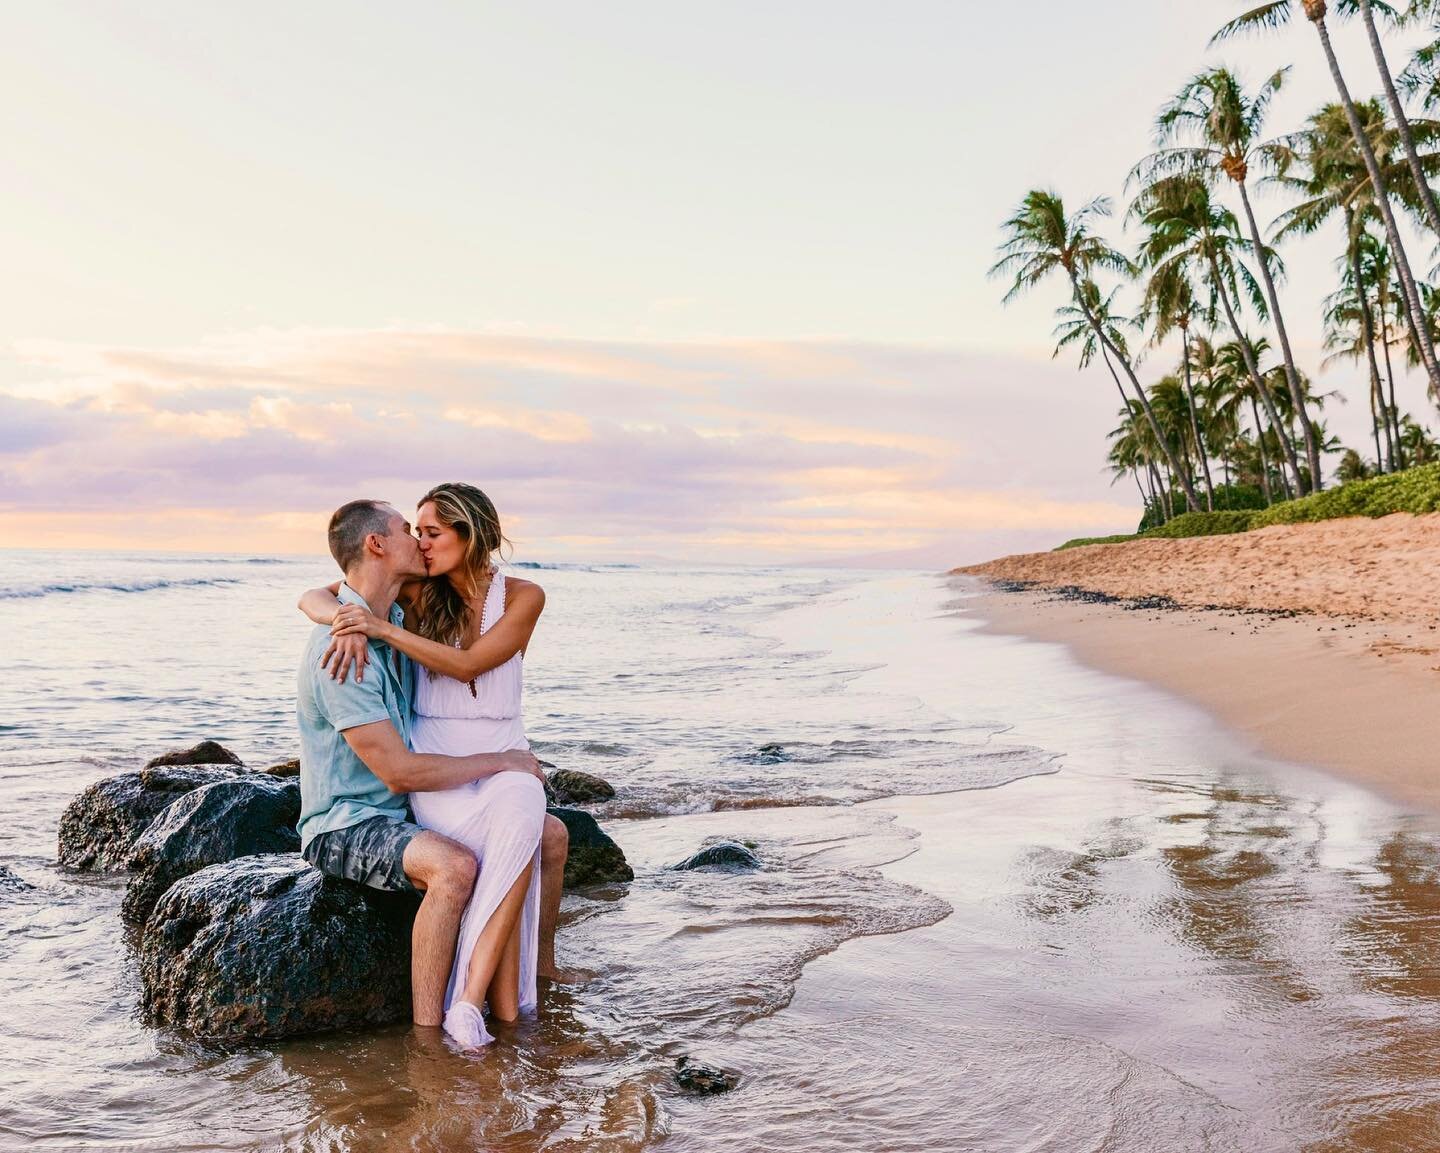 Travis &amp; Stephanie&rsquo;s Hawaii wedding weekend was nothing sort of amazing! 😍 Would love to travel to Hawaii again for more weddings or engagement sessions. Who&rsquo;s with me?! 🙋🏼&zwj;♂️